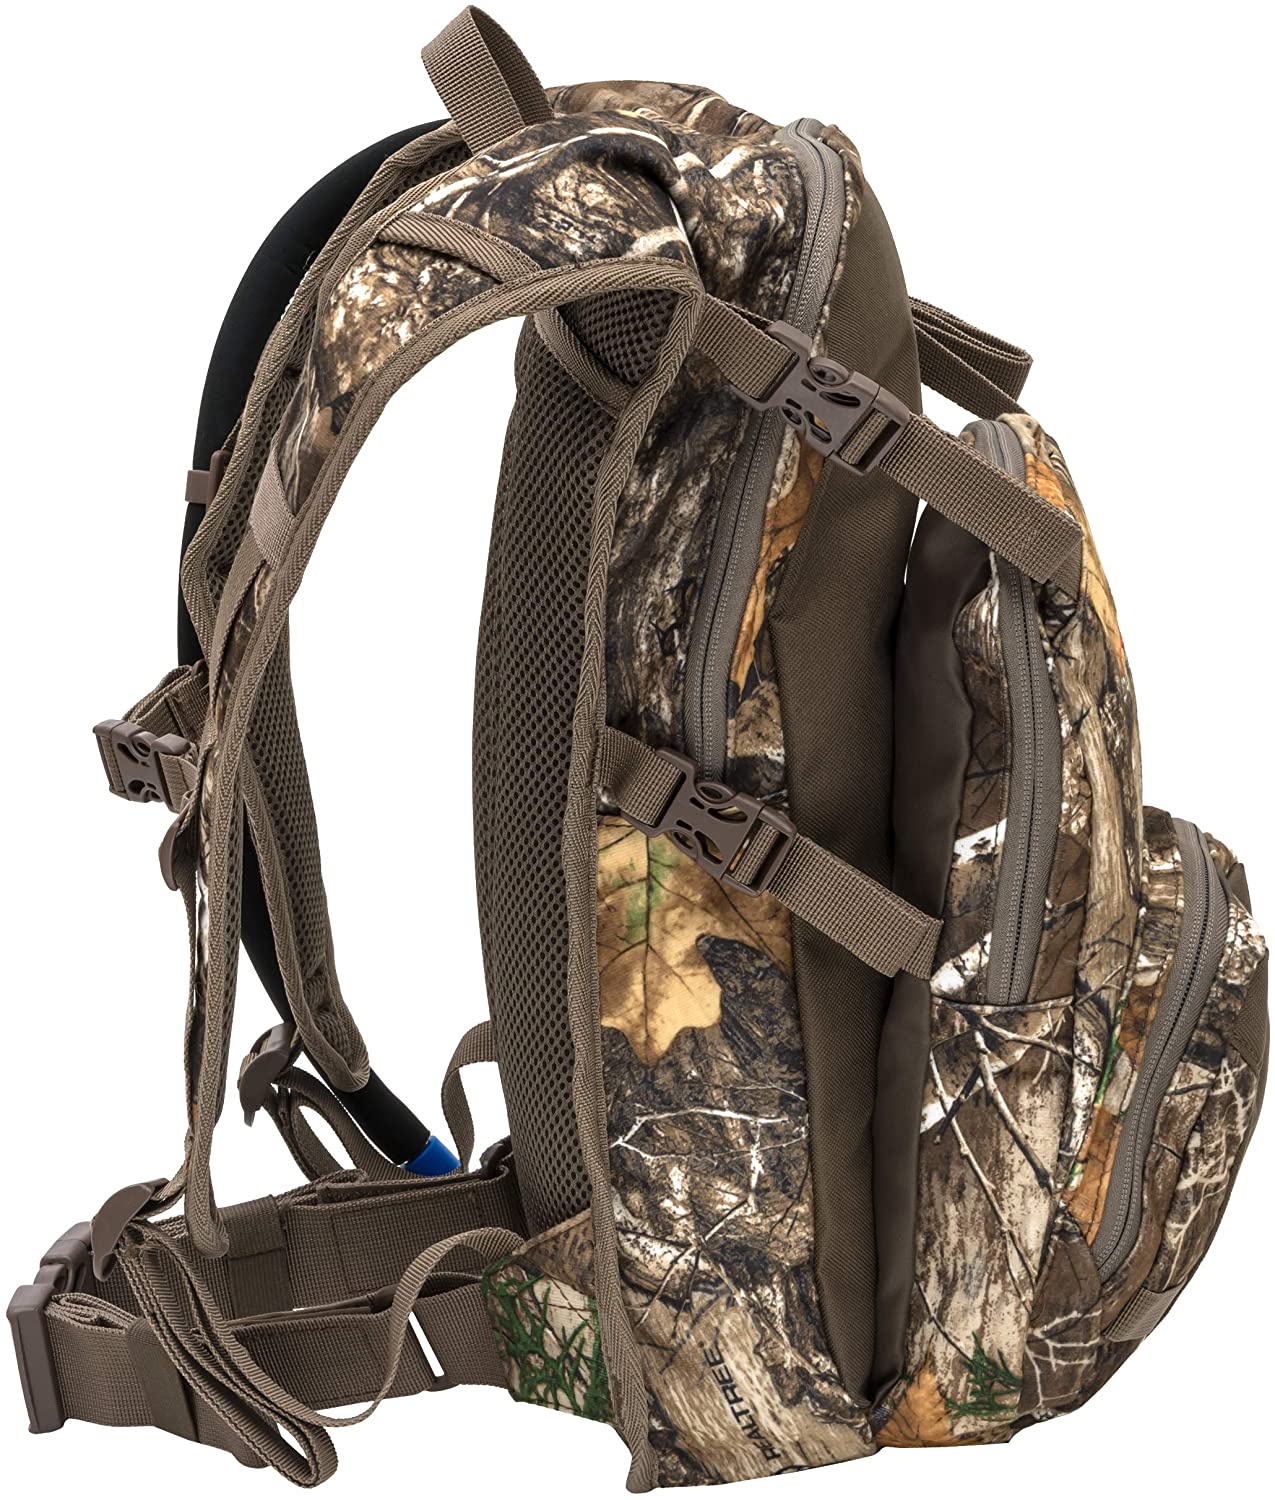 ALPS OutdoorZ Willow Creek Hunting Pack, Realtree Edge - AL9411100